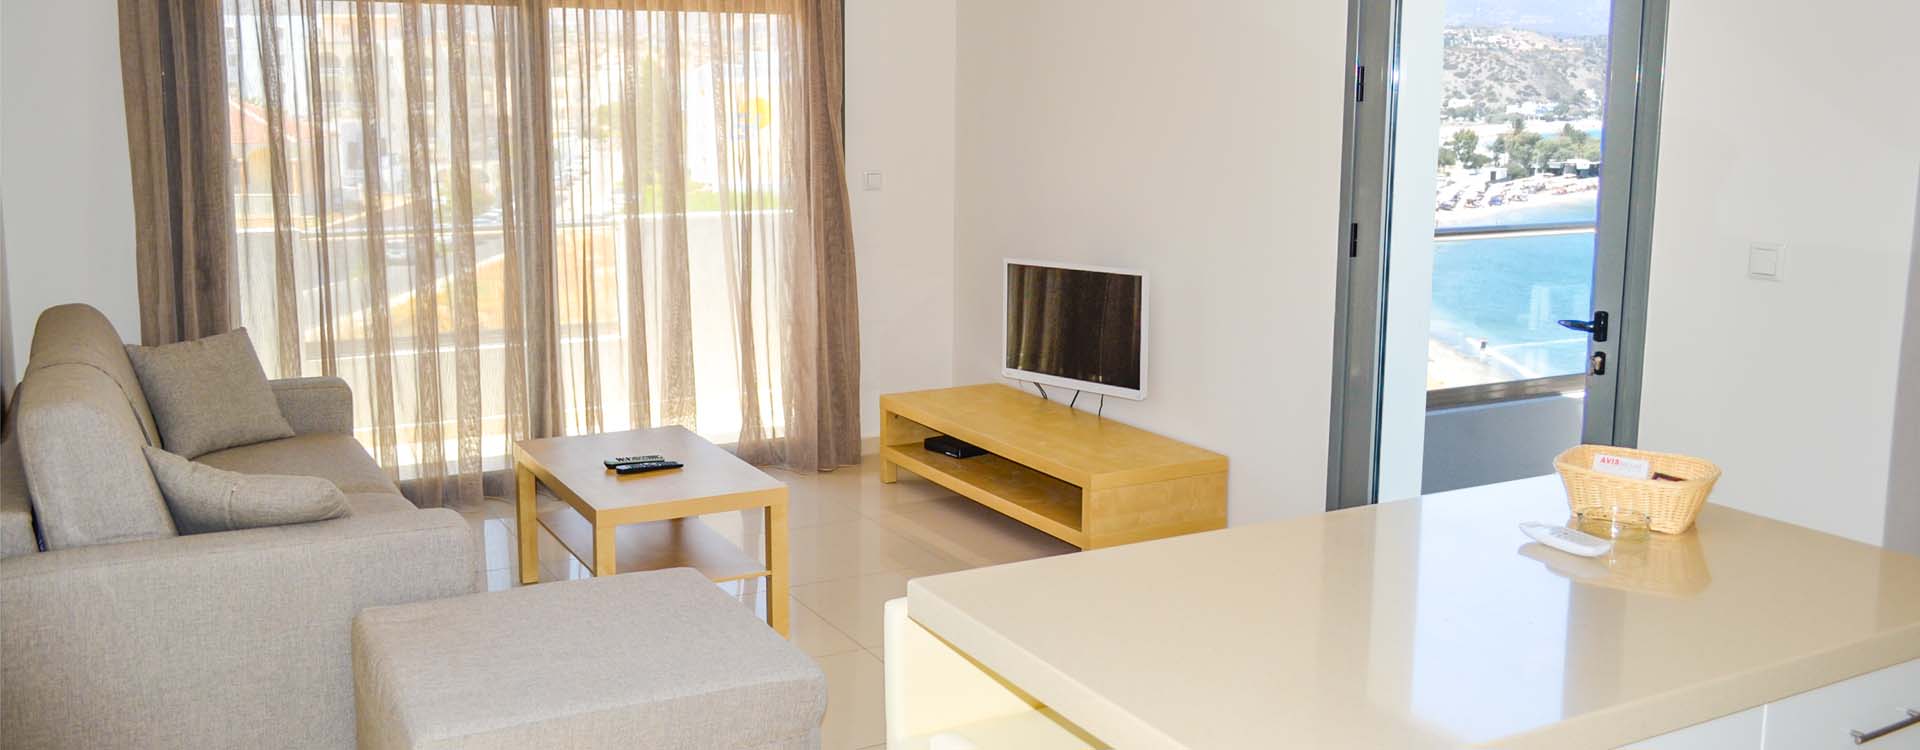 Fully furnished and equipped apartments with a view of the sea and mountains